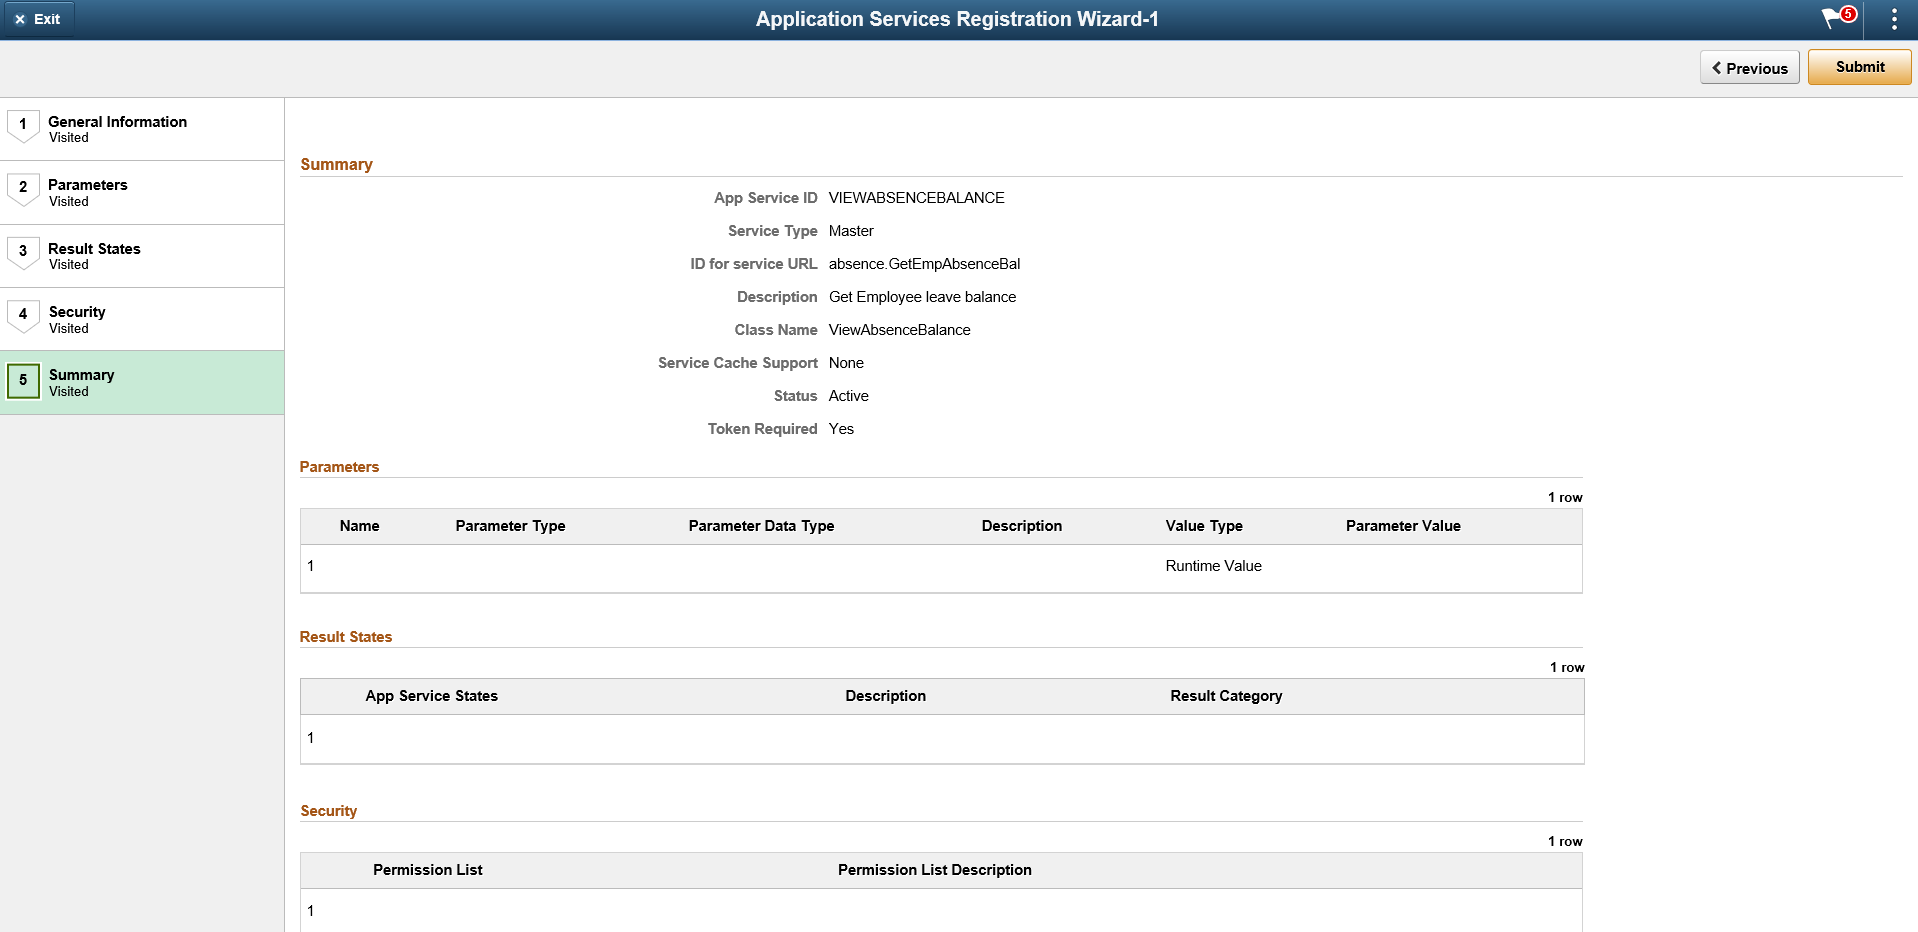 Application Service Registration Wizard - Summary page